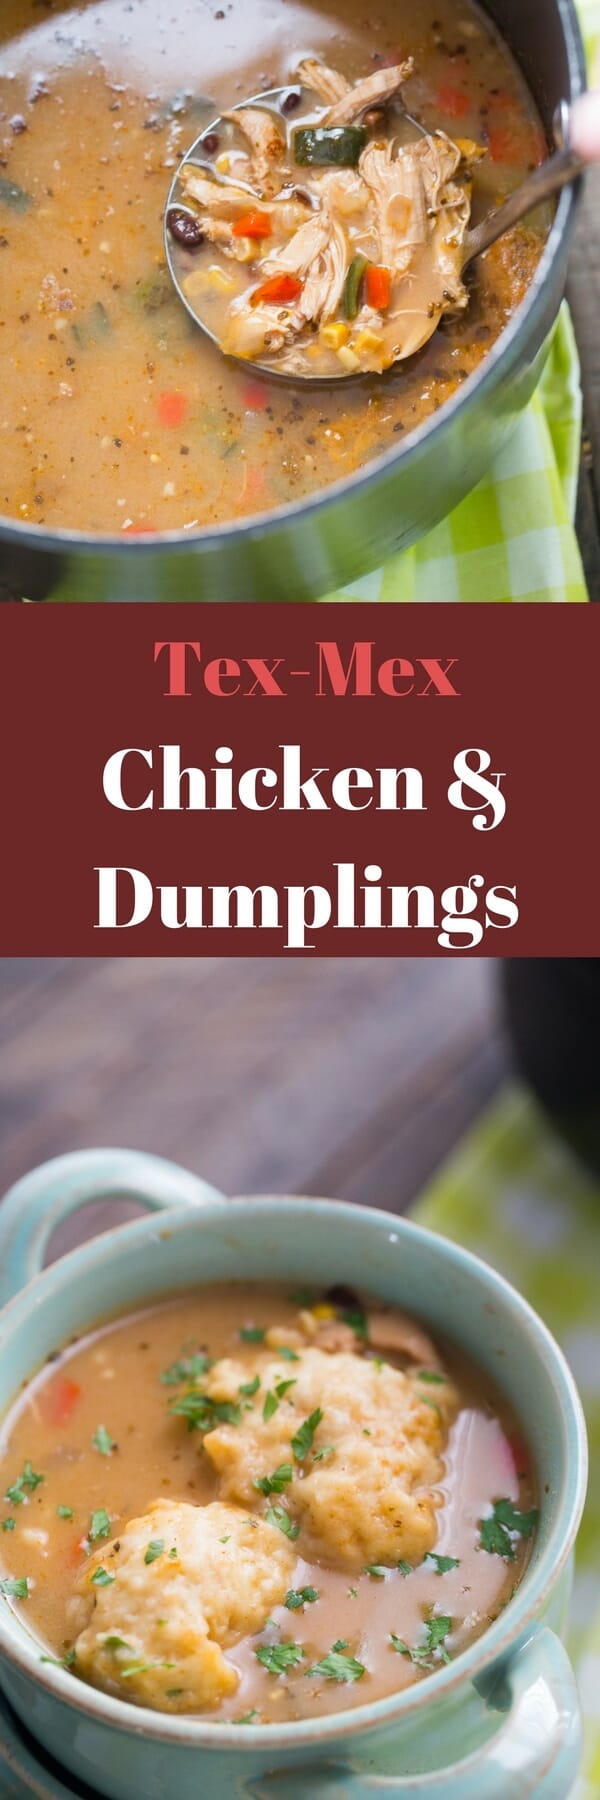 This chicken and dumplings recipe gets a Tex-Mex update! You are going to love the bold flavor from the spies and the veggies! This soup satisfies the belly and the soul!